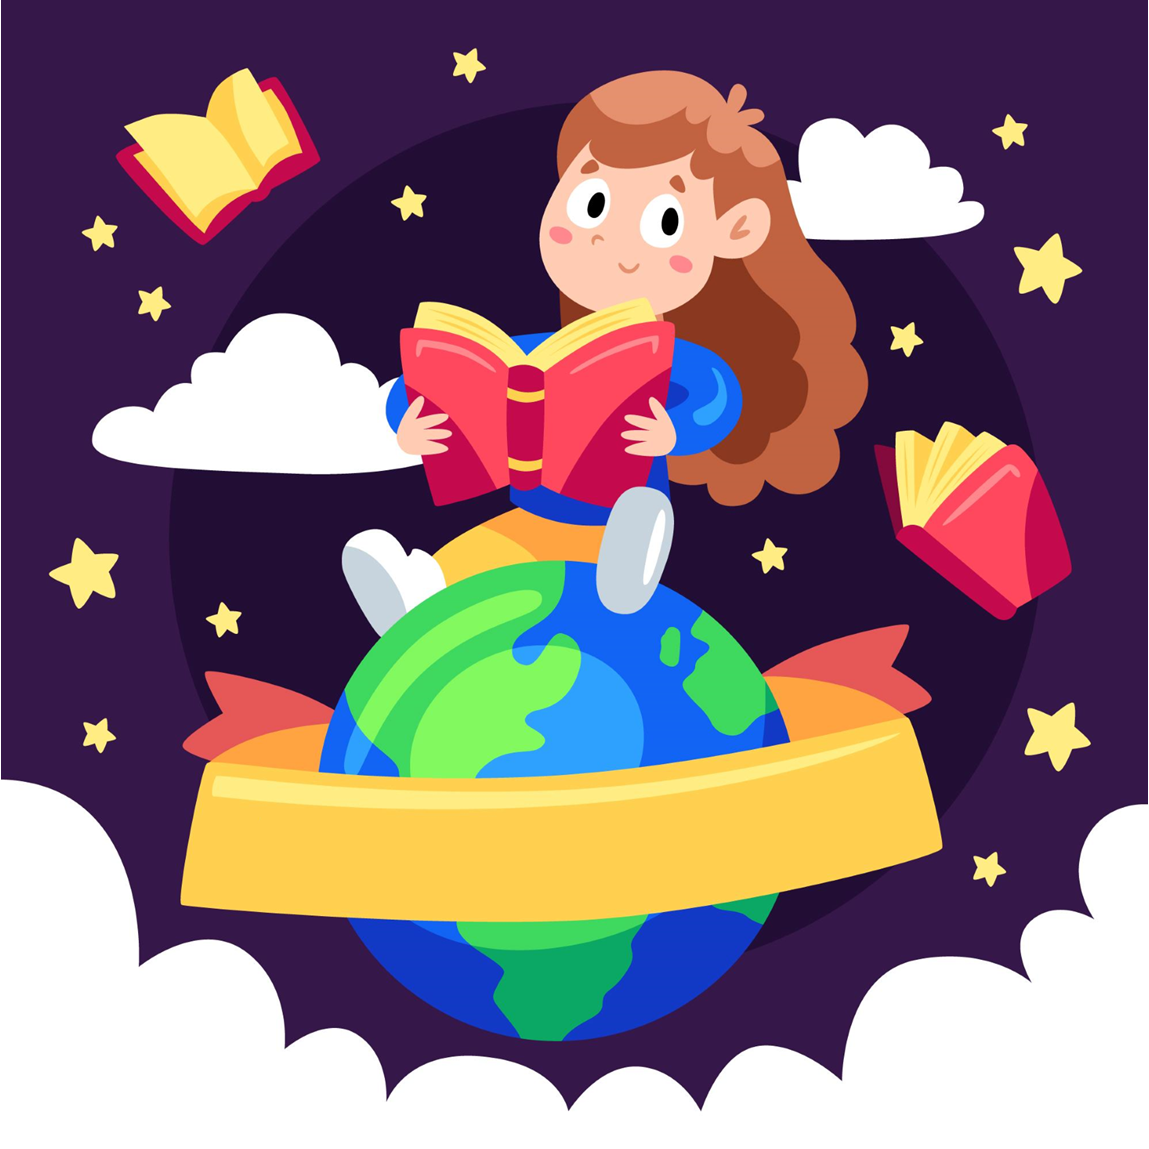 Image of a young girl holding a book while sitting on top of the world out in space.